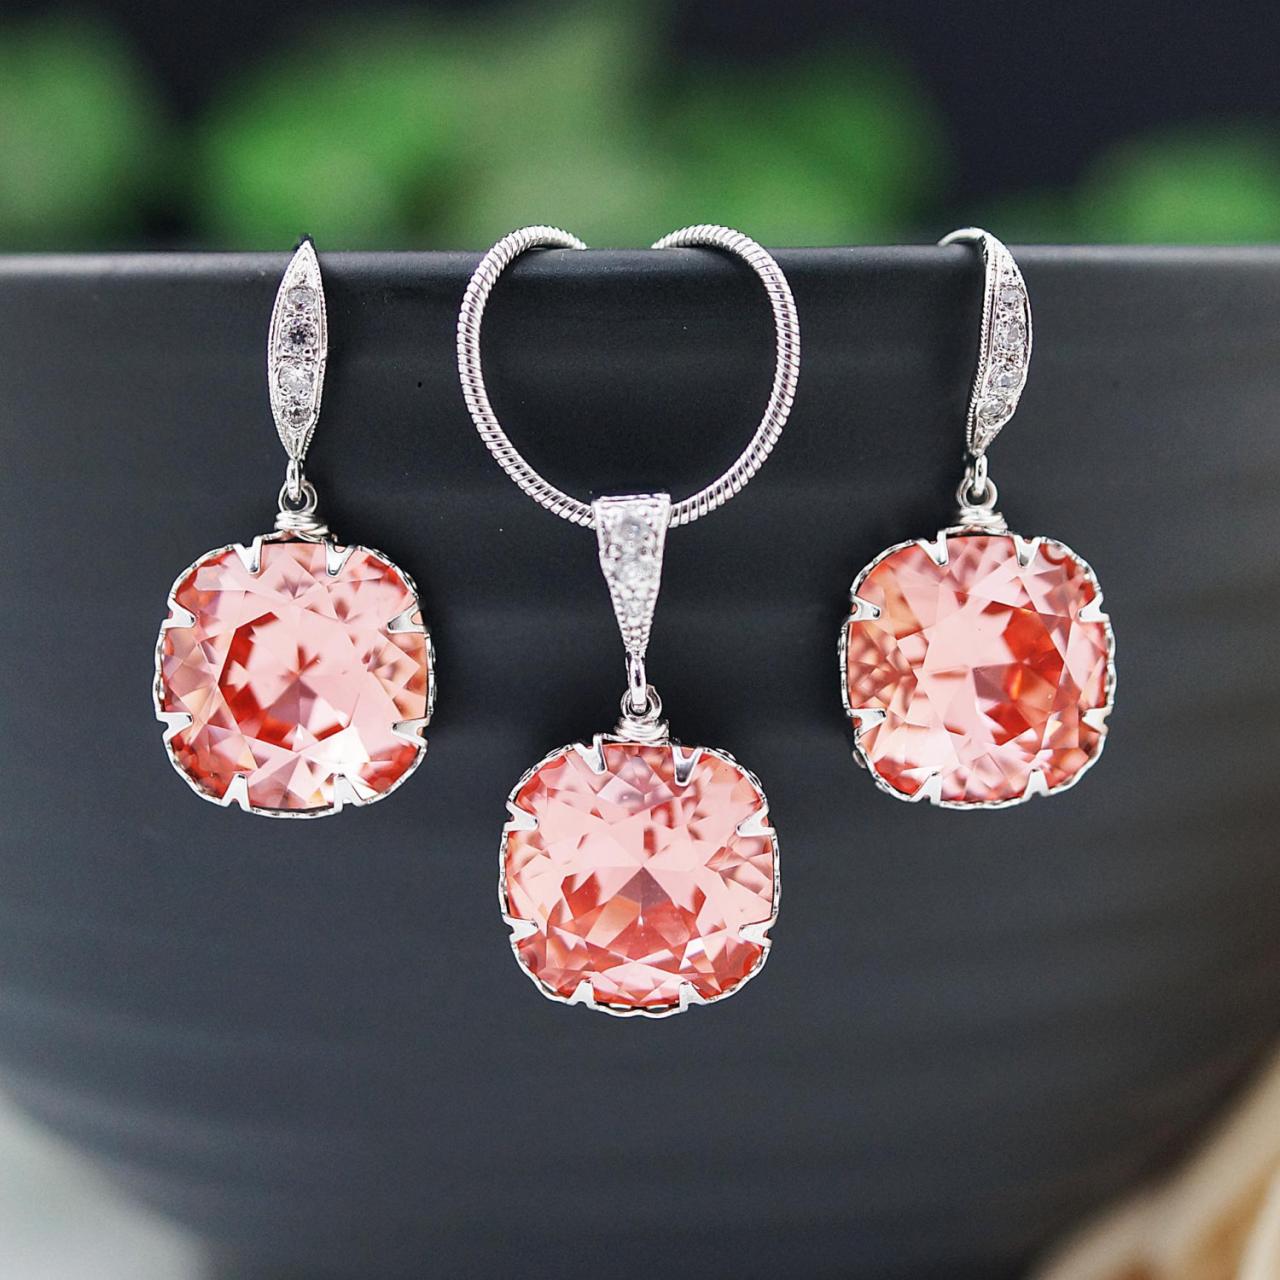 Bridesmaid Gifts Bridesmaid Earrings Cubic Zirconia Ear Wires With Rose Peach Coral Swarovski Crystal Square Drops Dangle Earrings